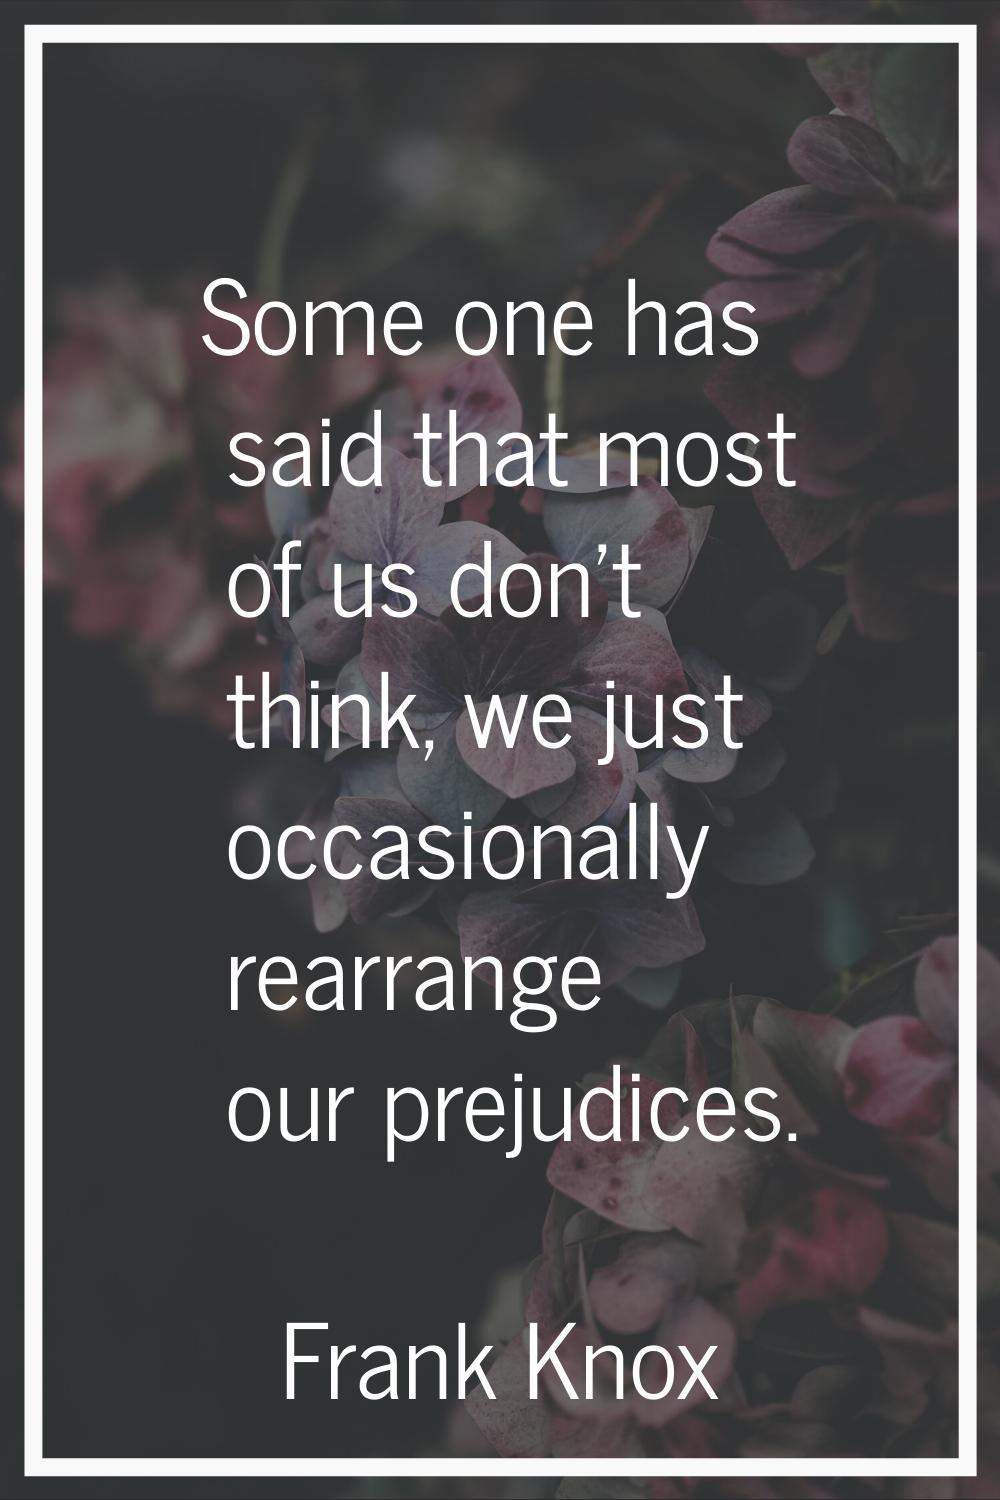 Some one has said that most of us don't think, we just occasionally rearrange our prejudices.